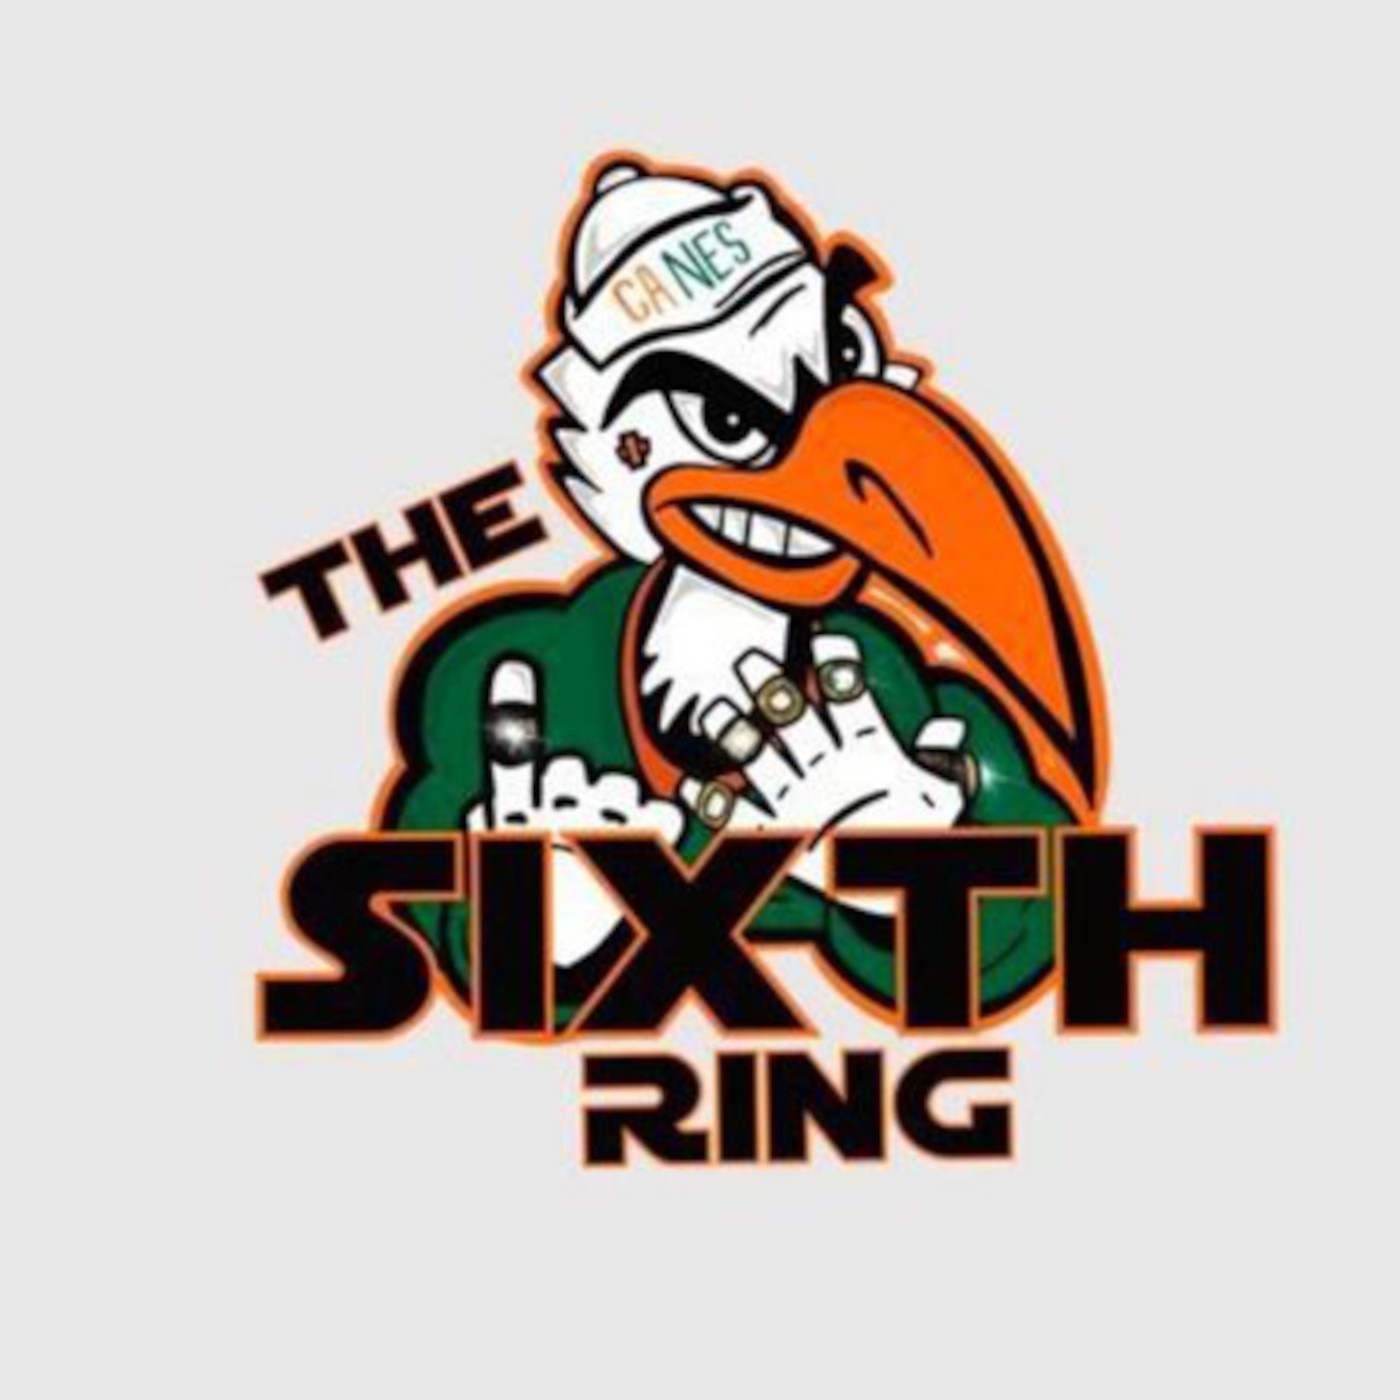 Scouting the Under Armour Camp  | Sixth Ring Canes